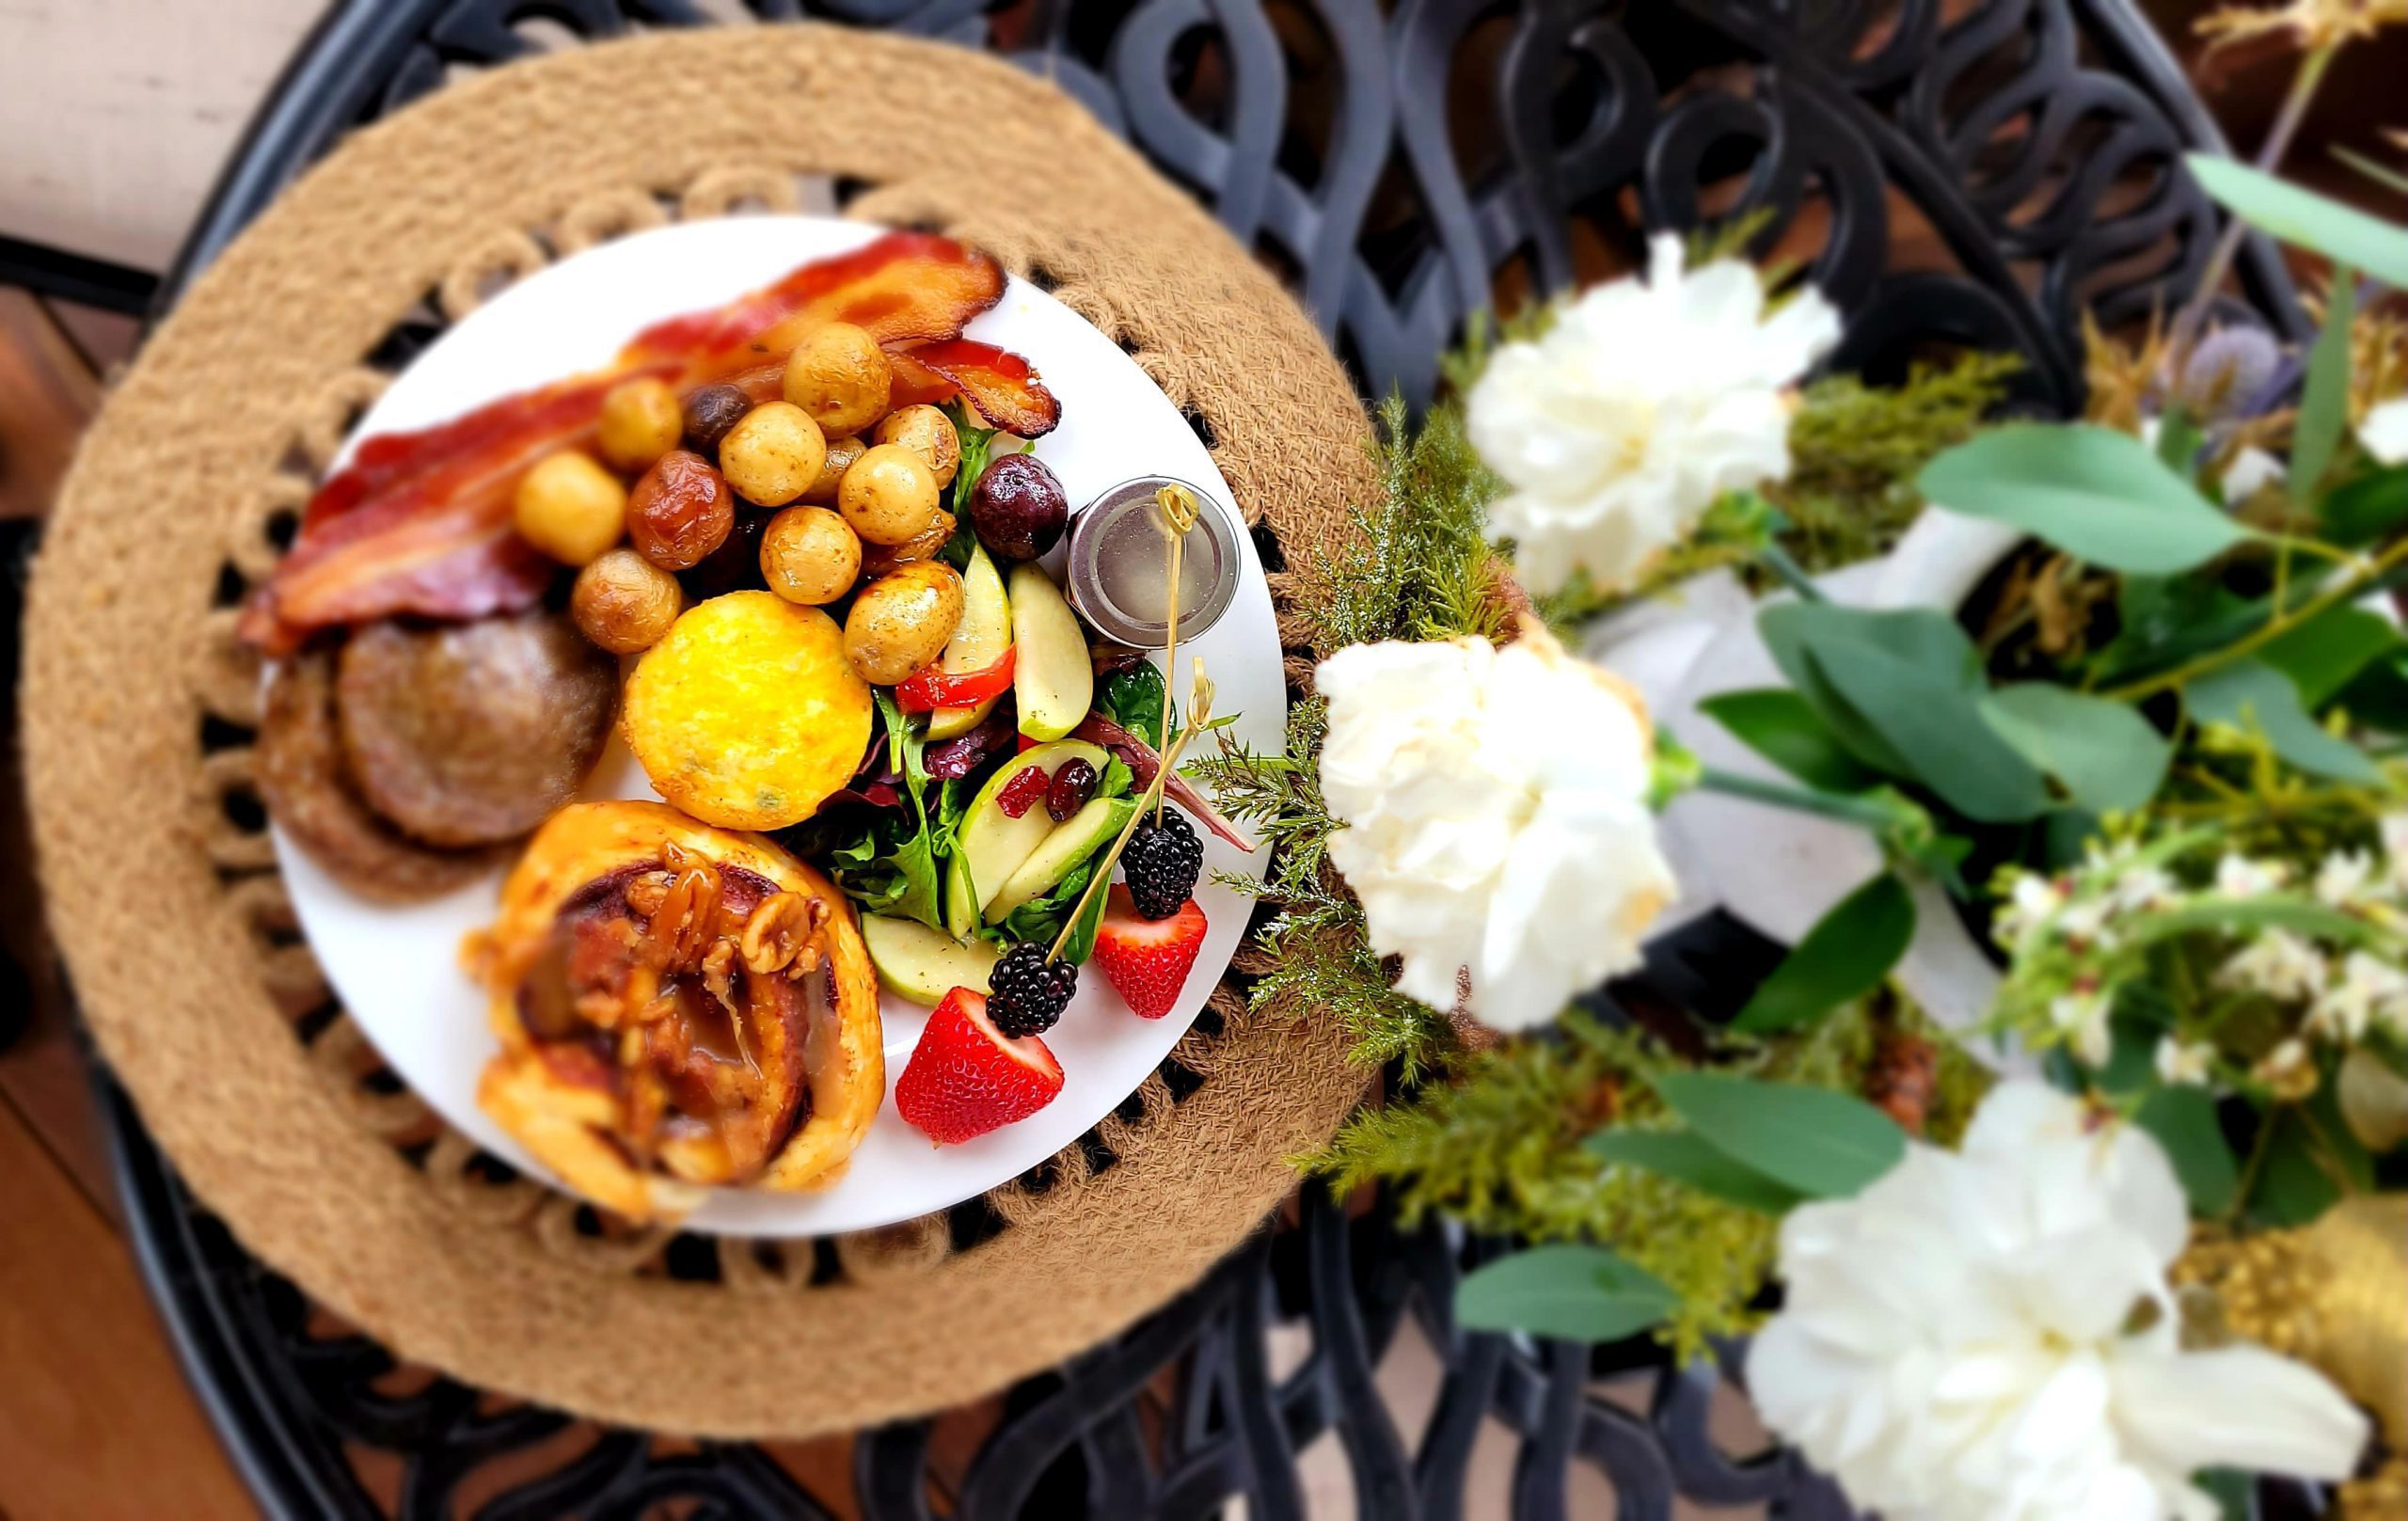 Delicious plate of food with white flower bouquet beside it